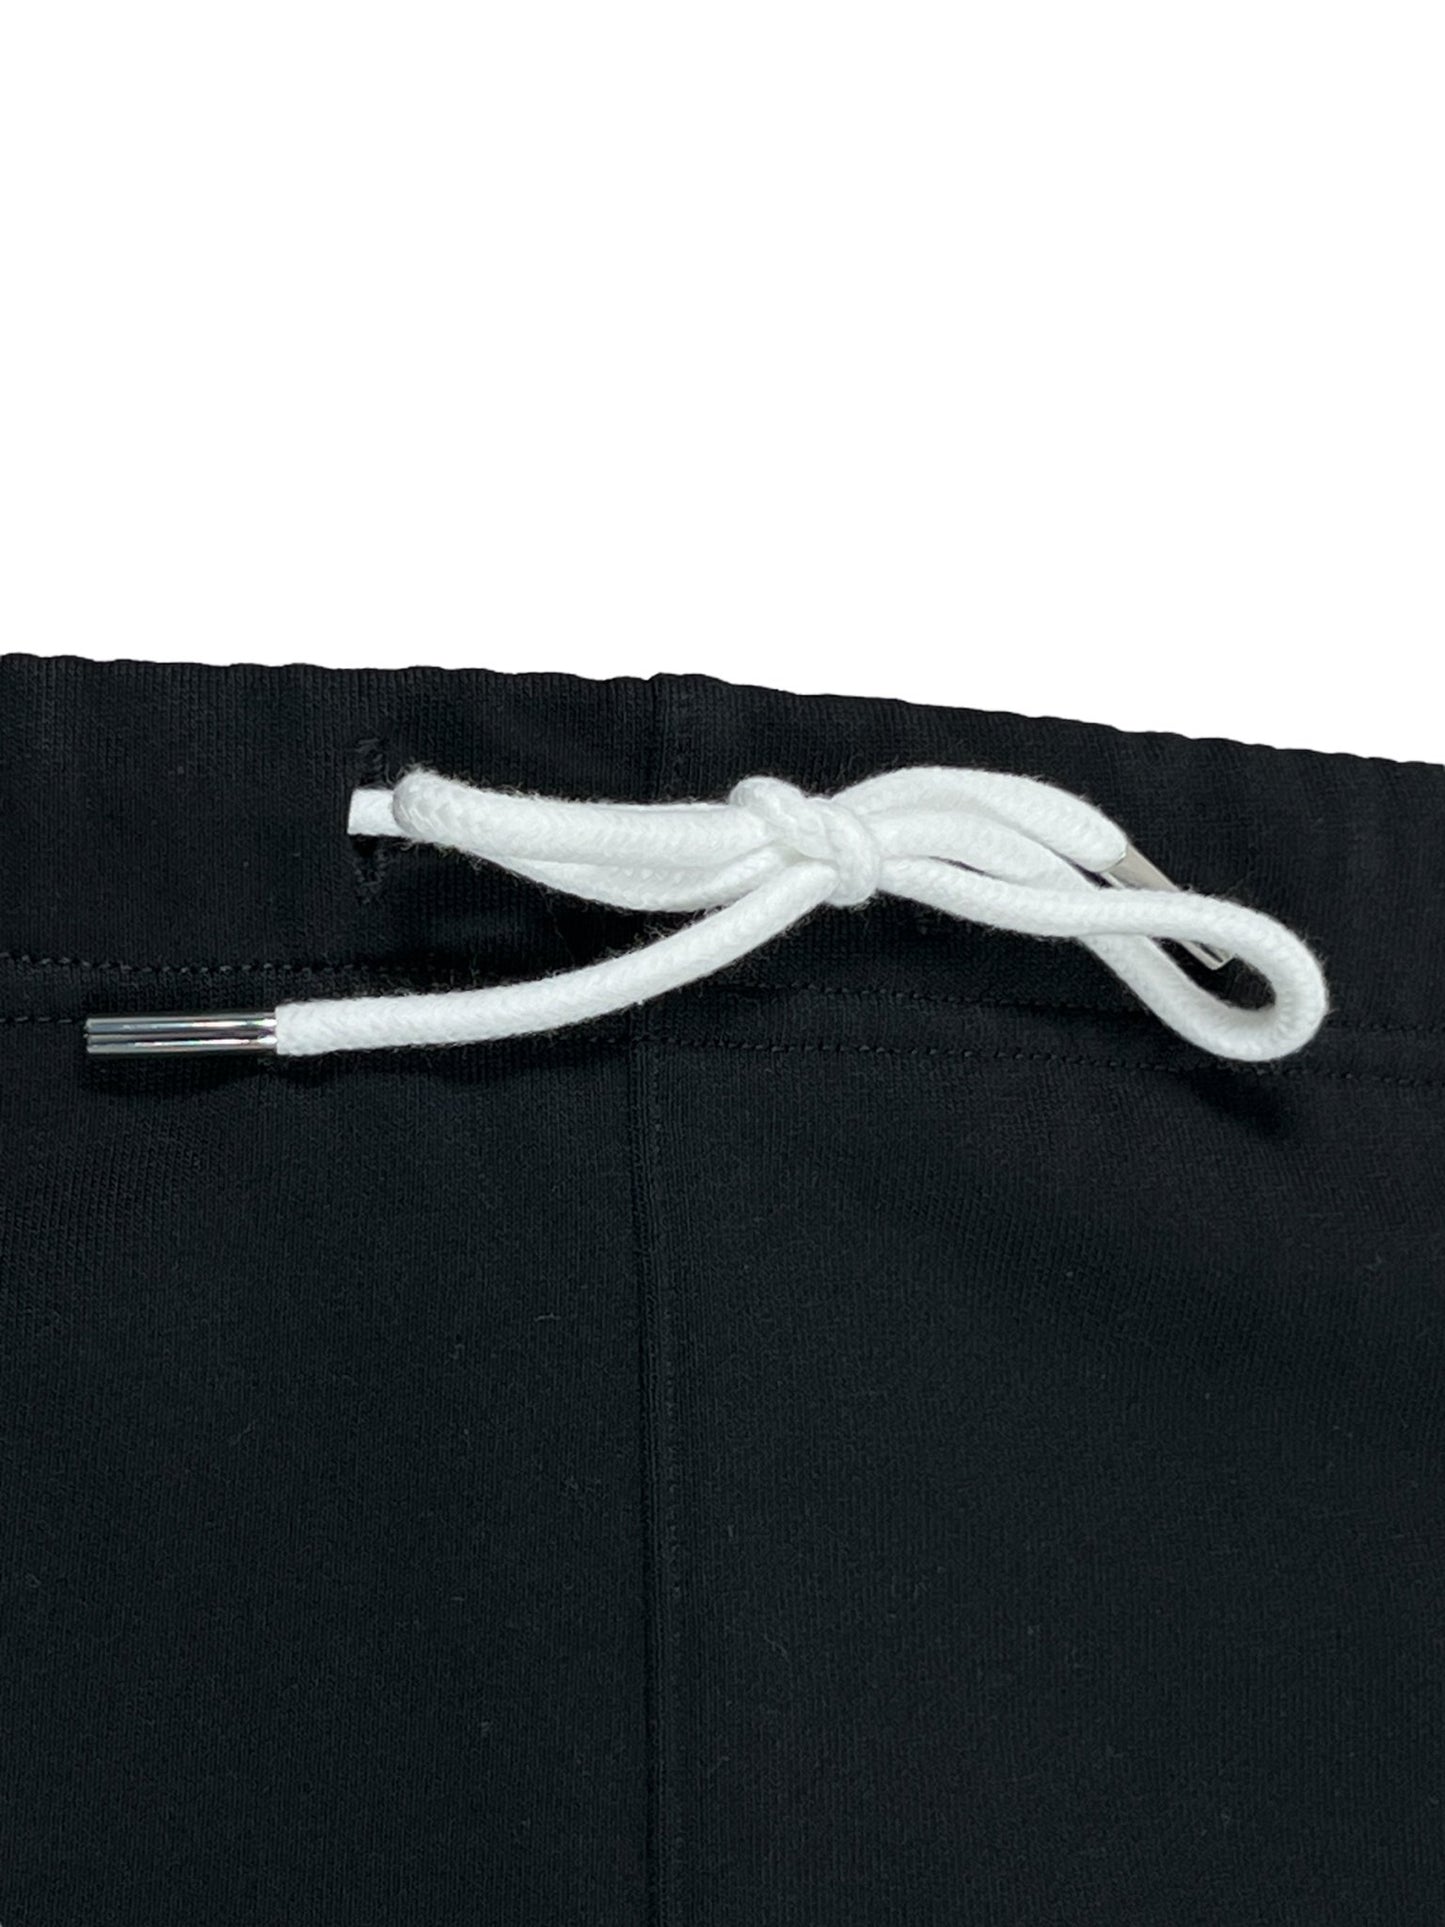 Close-up of a white drawstring tied into a bow on black PURPLE BRAND P446-FCBB FRENCH TERRY SWEATSHORT BLK fabric, with metal aglets on the string ends.